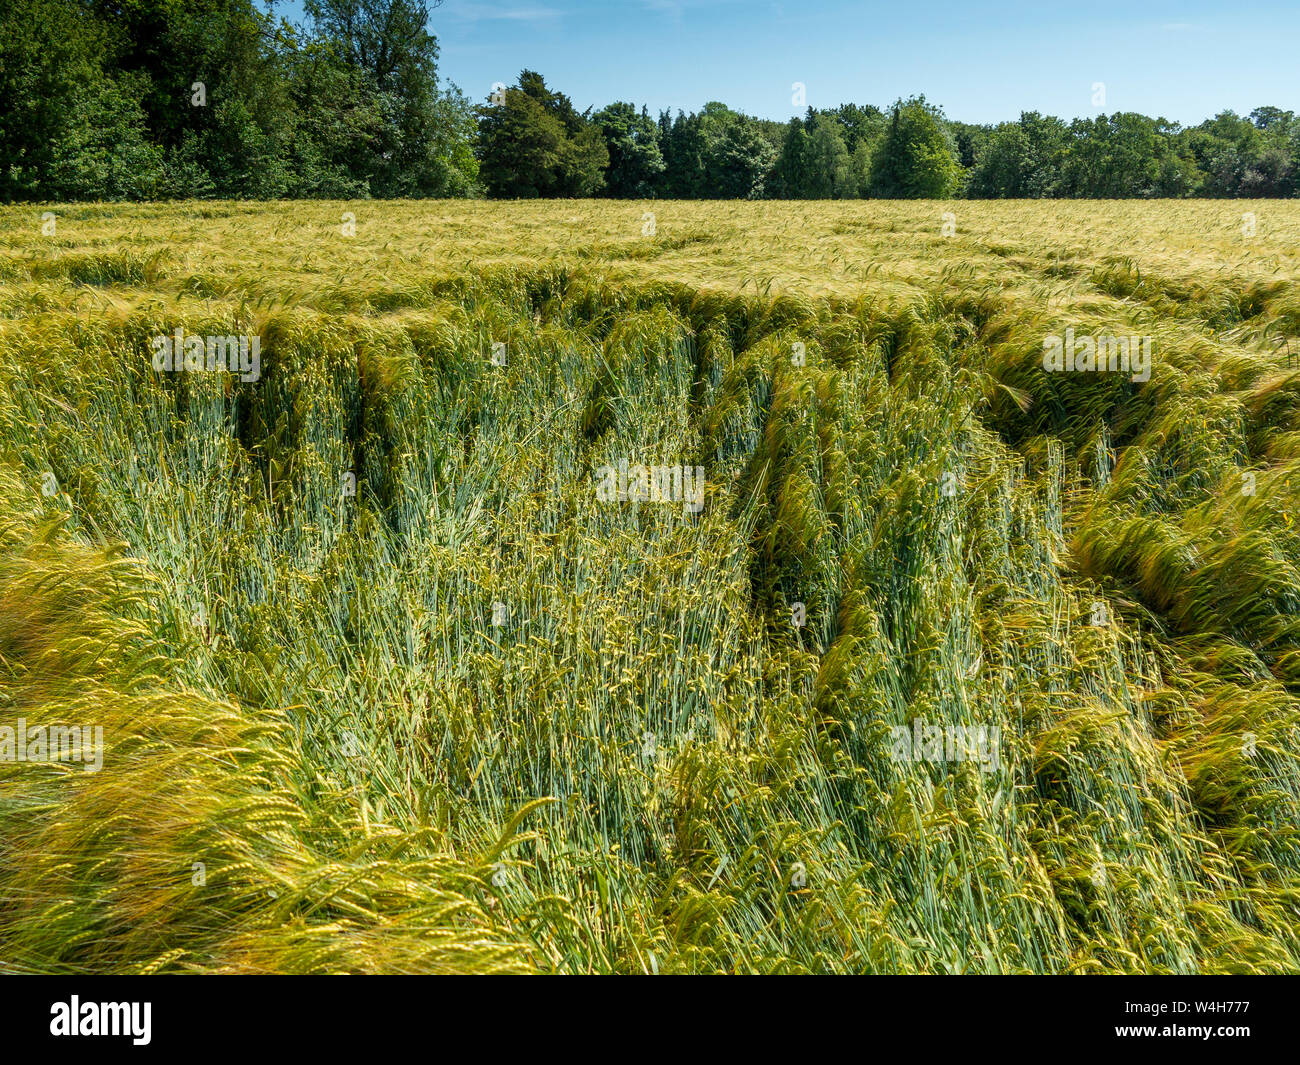 A section of barley crop damaged by overnight rain and wind Stock Photo